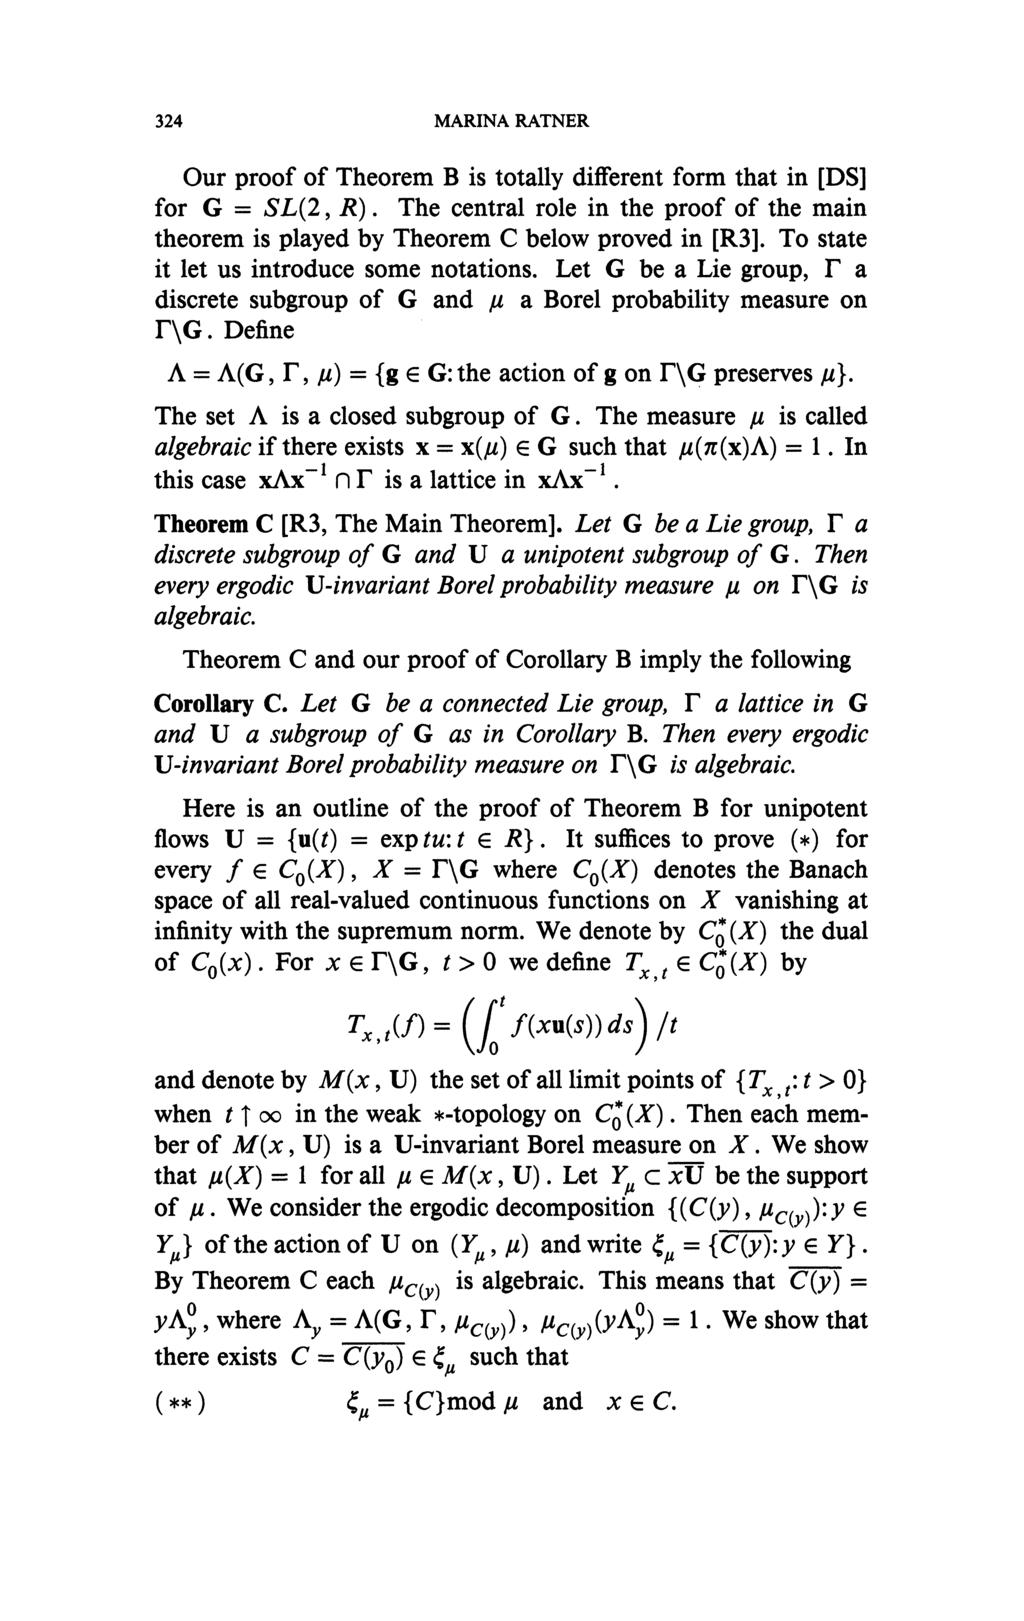 324 MARINA RATNER Our proof of Theorem B is totally different form that in [DS] for G = SL(2, R). The central role in the proof of the main theorem is played by Theorem C below proved in [R3].